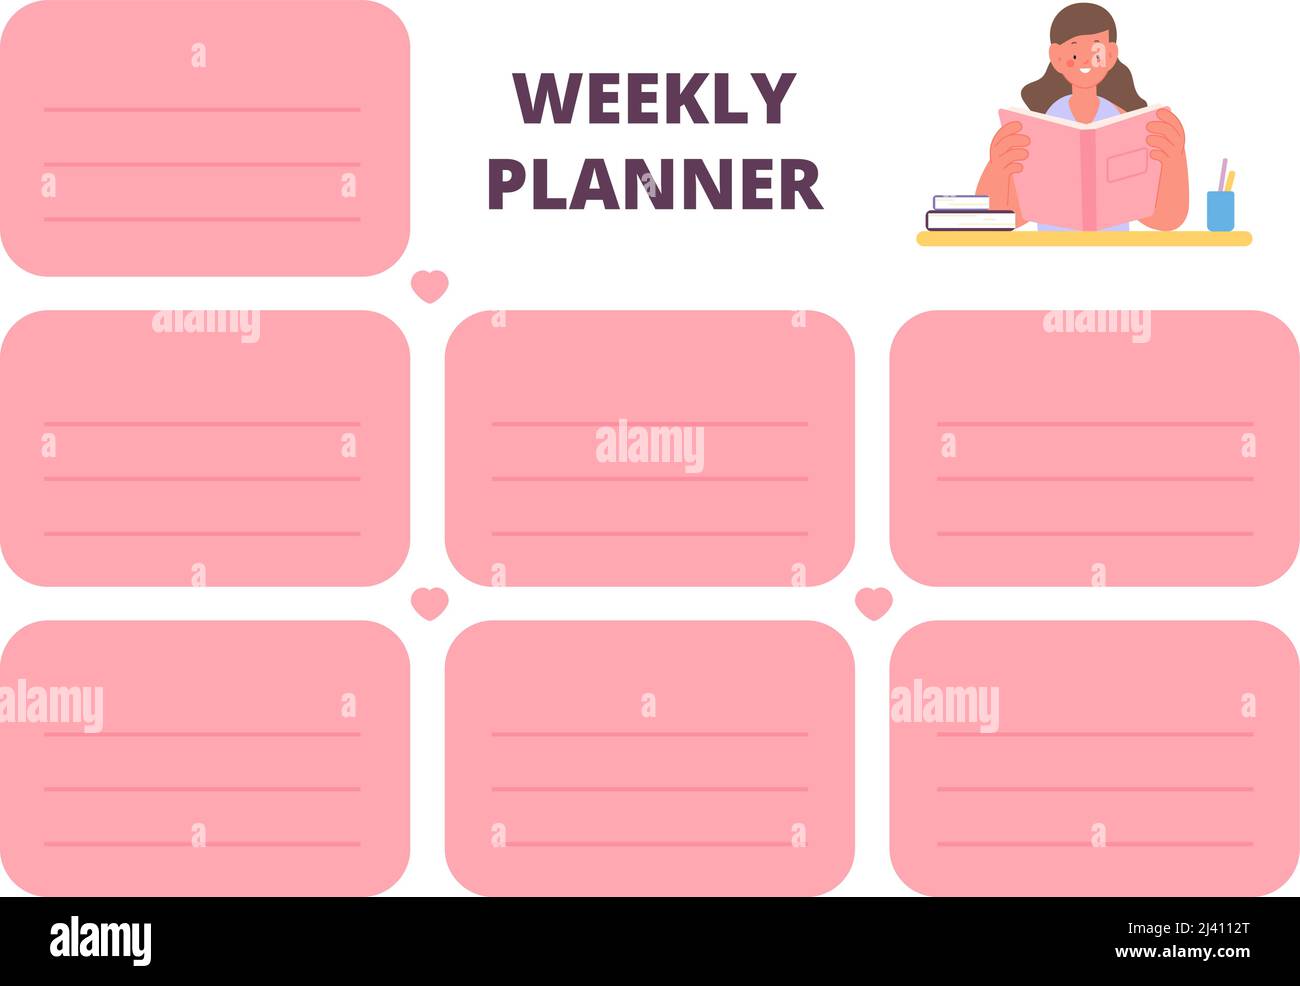 art-collectibles-weekly-planner-fot-that-girl-digital-mip-gt